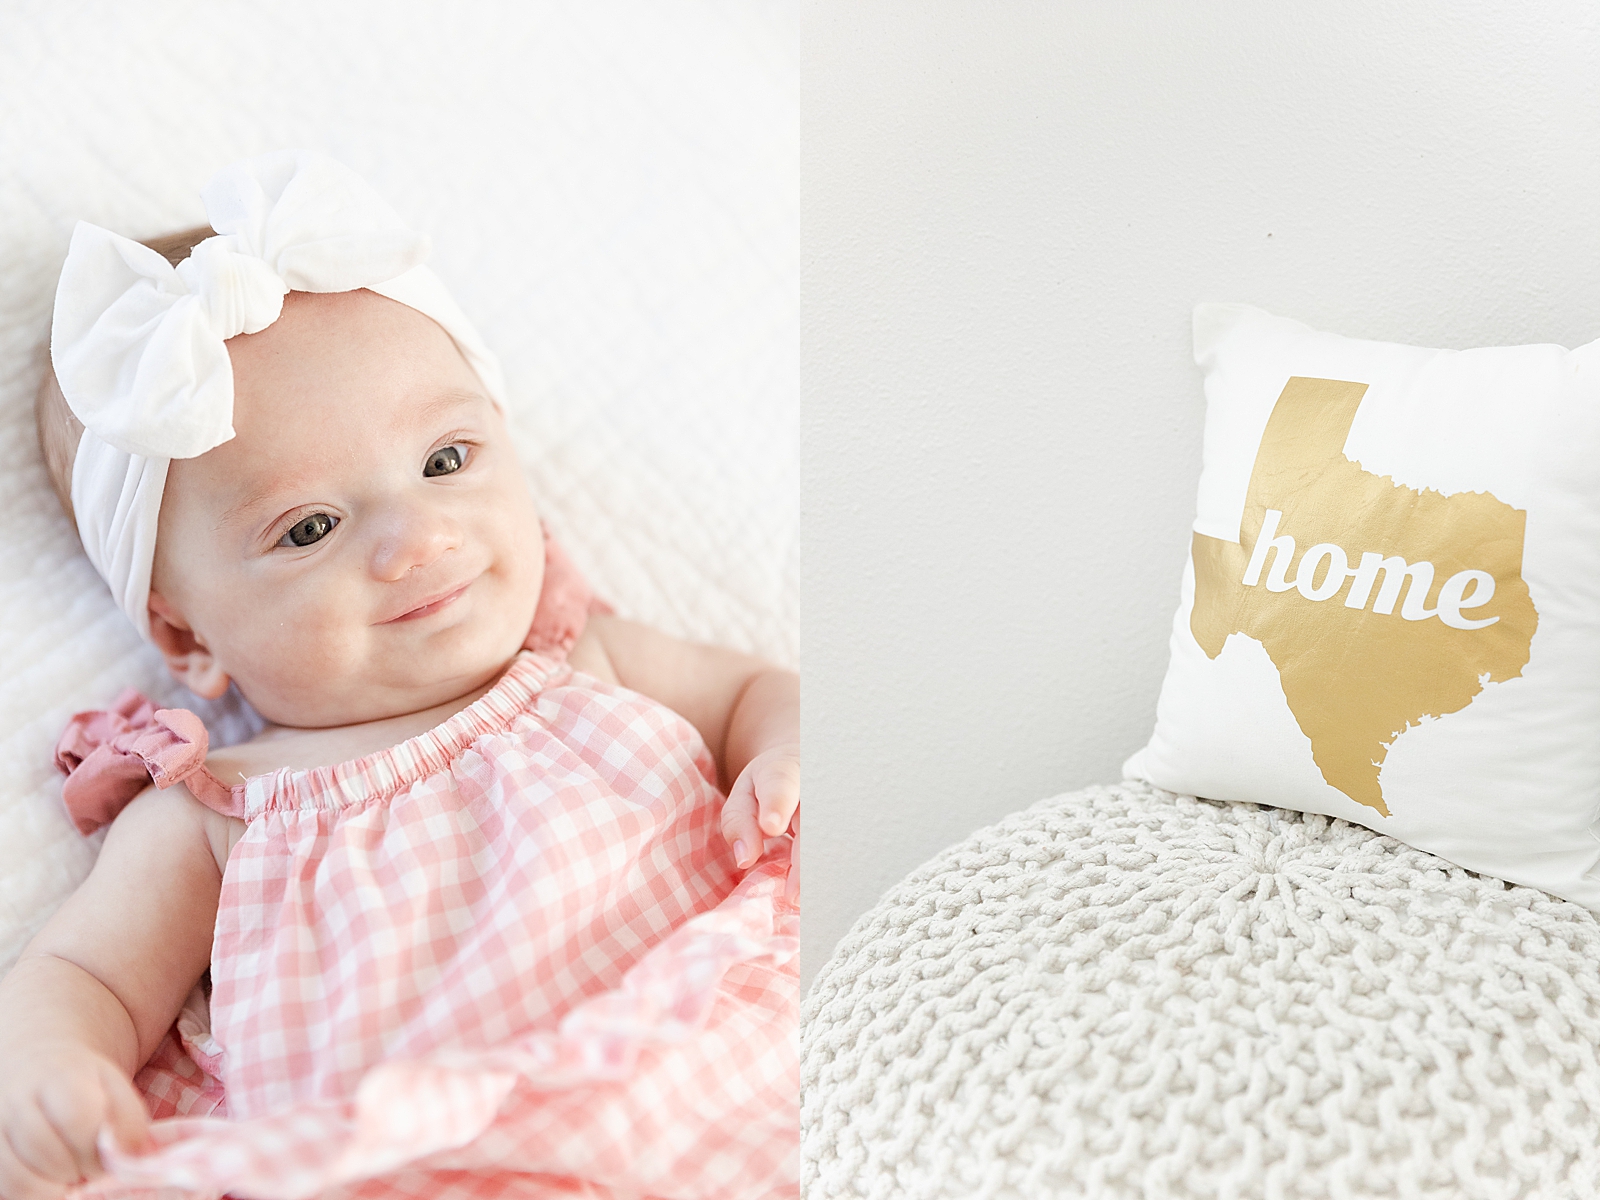 Lifestyle Newborn Photos texas is home pillow nursery decoration and baby smiling in white bow and pink plaid romper